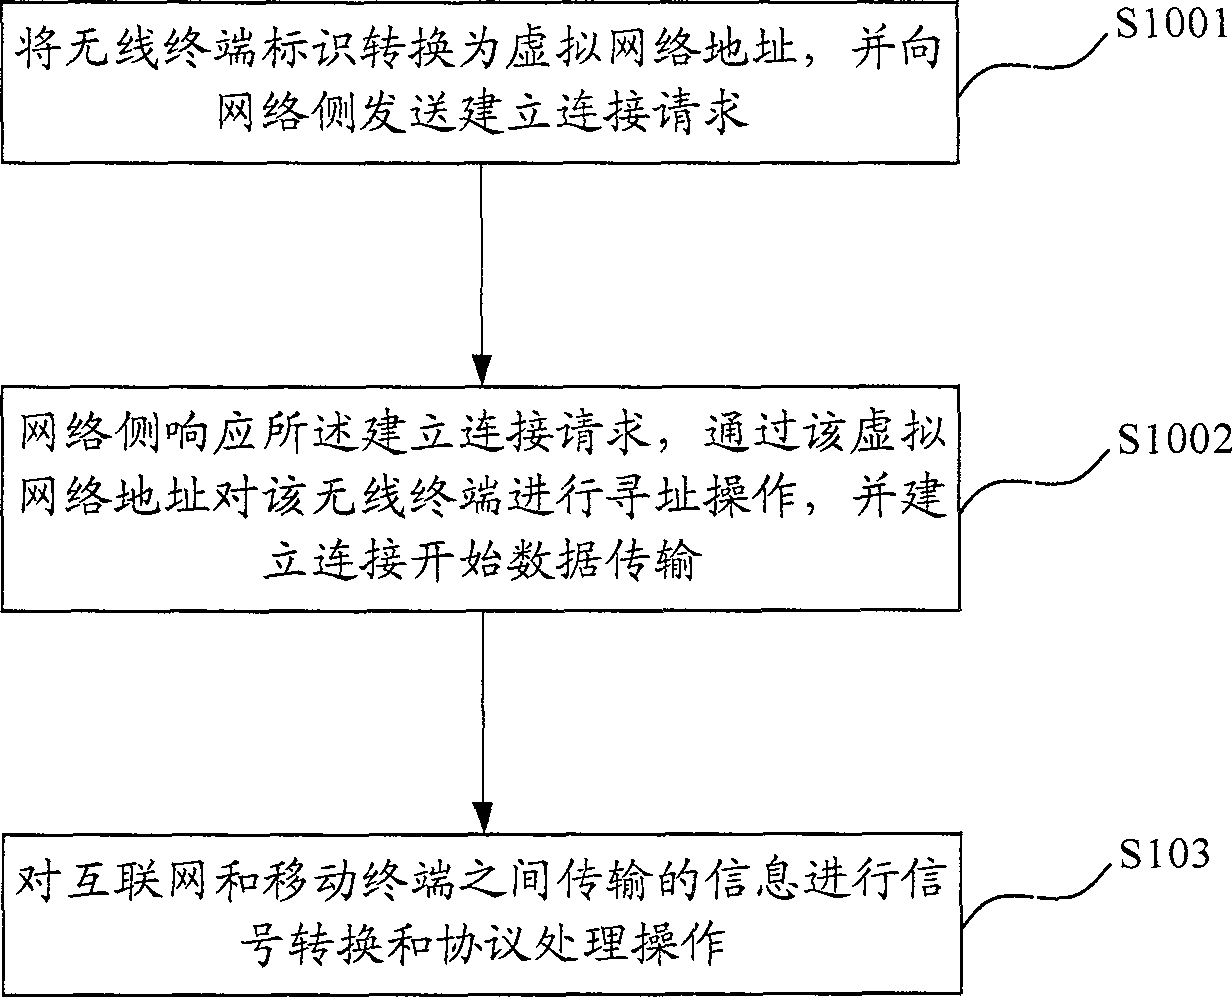 Method and system for radio terminal wire accessing interconnected network